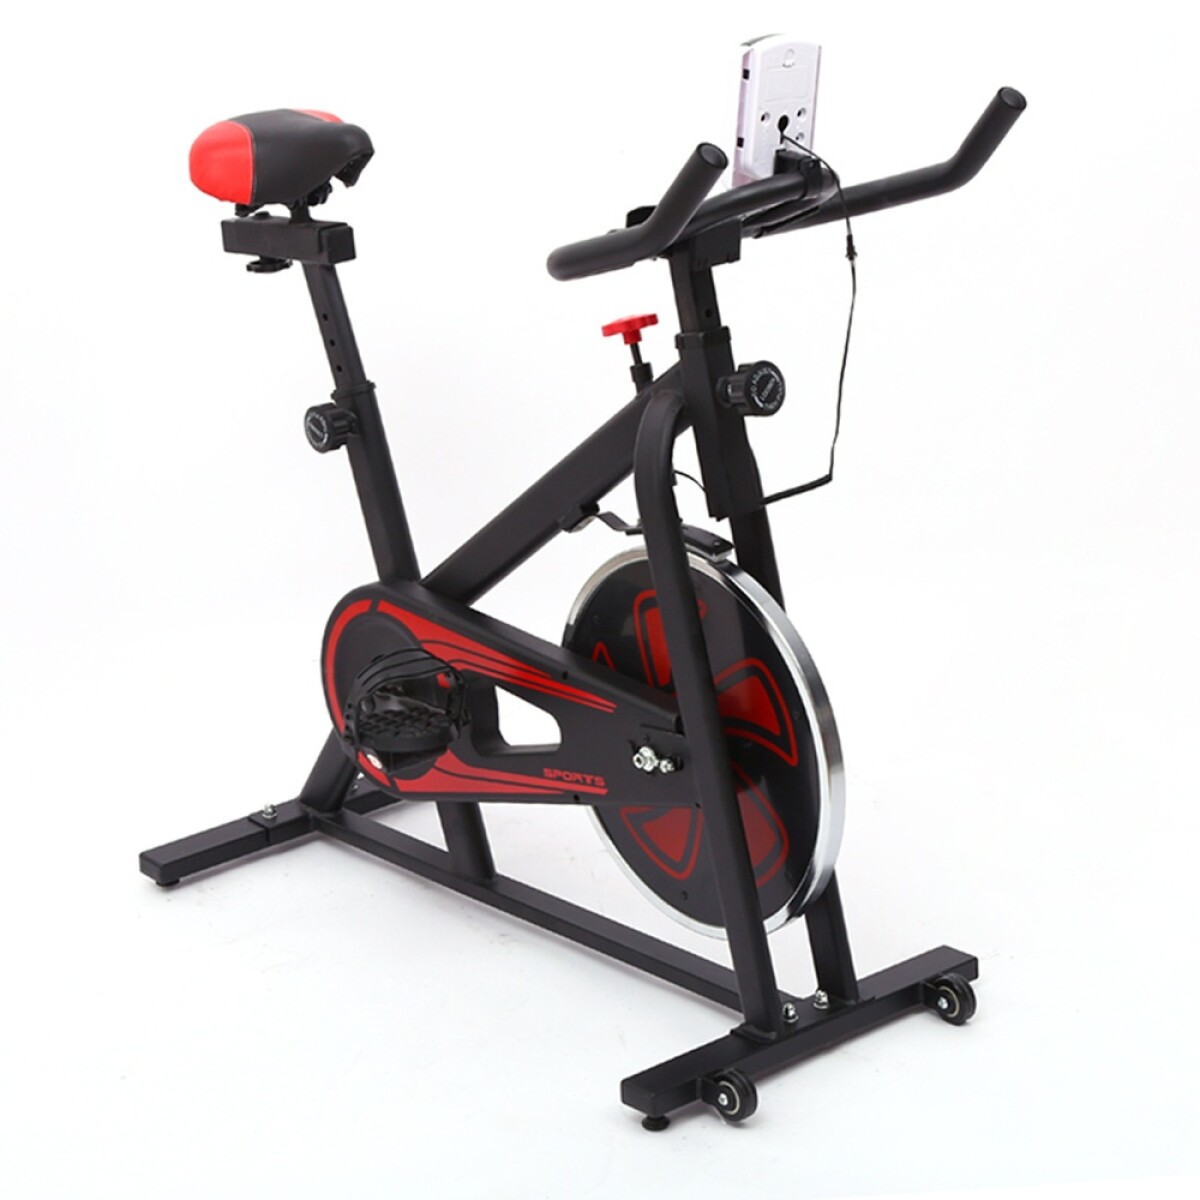 Bicicleta Spinning Max 120 Kg Excelente Calidad Regulable - Negro 